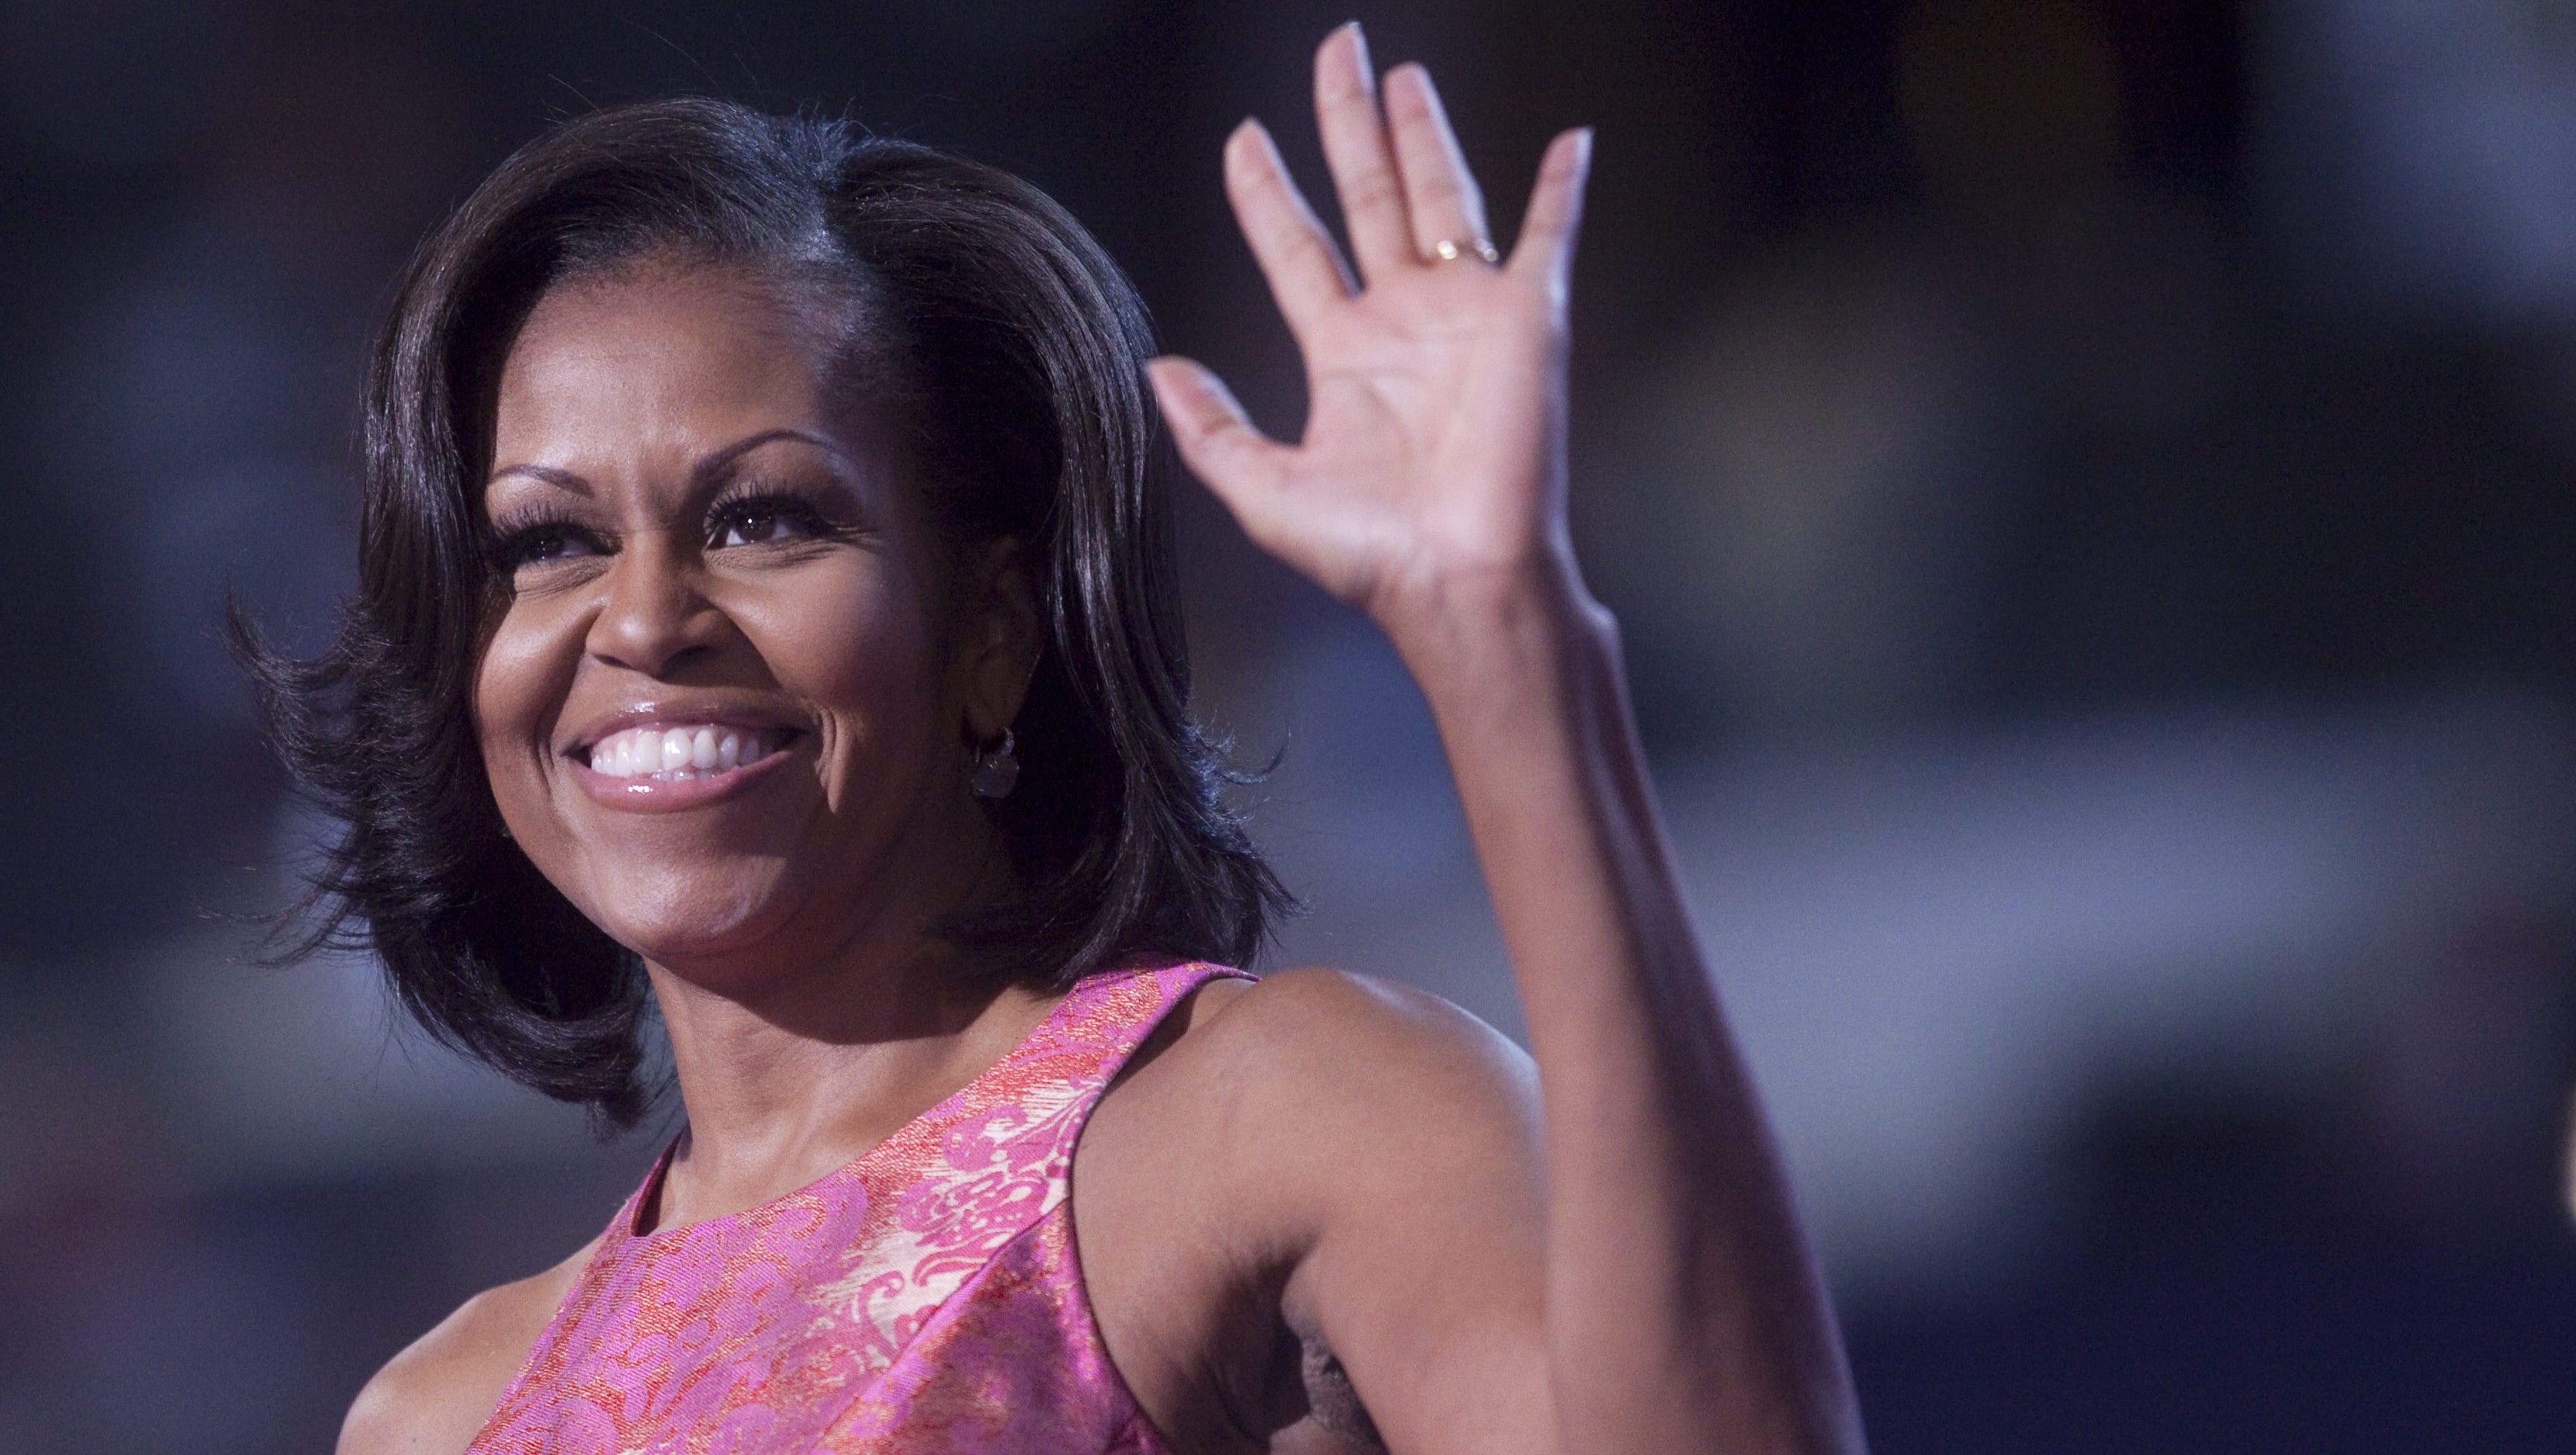 7 Michelle Obama quotes and moments we can't forget